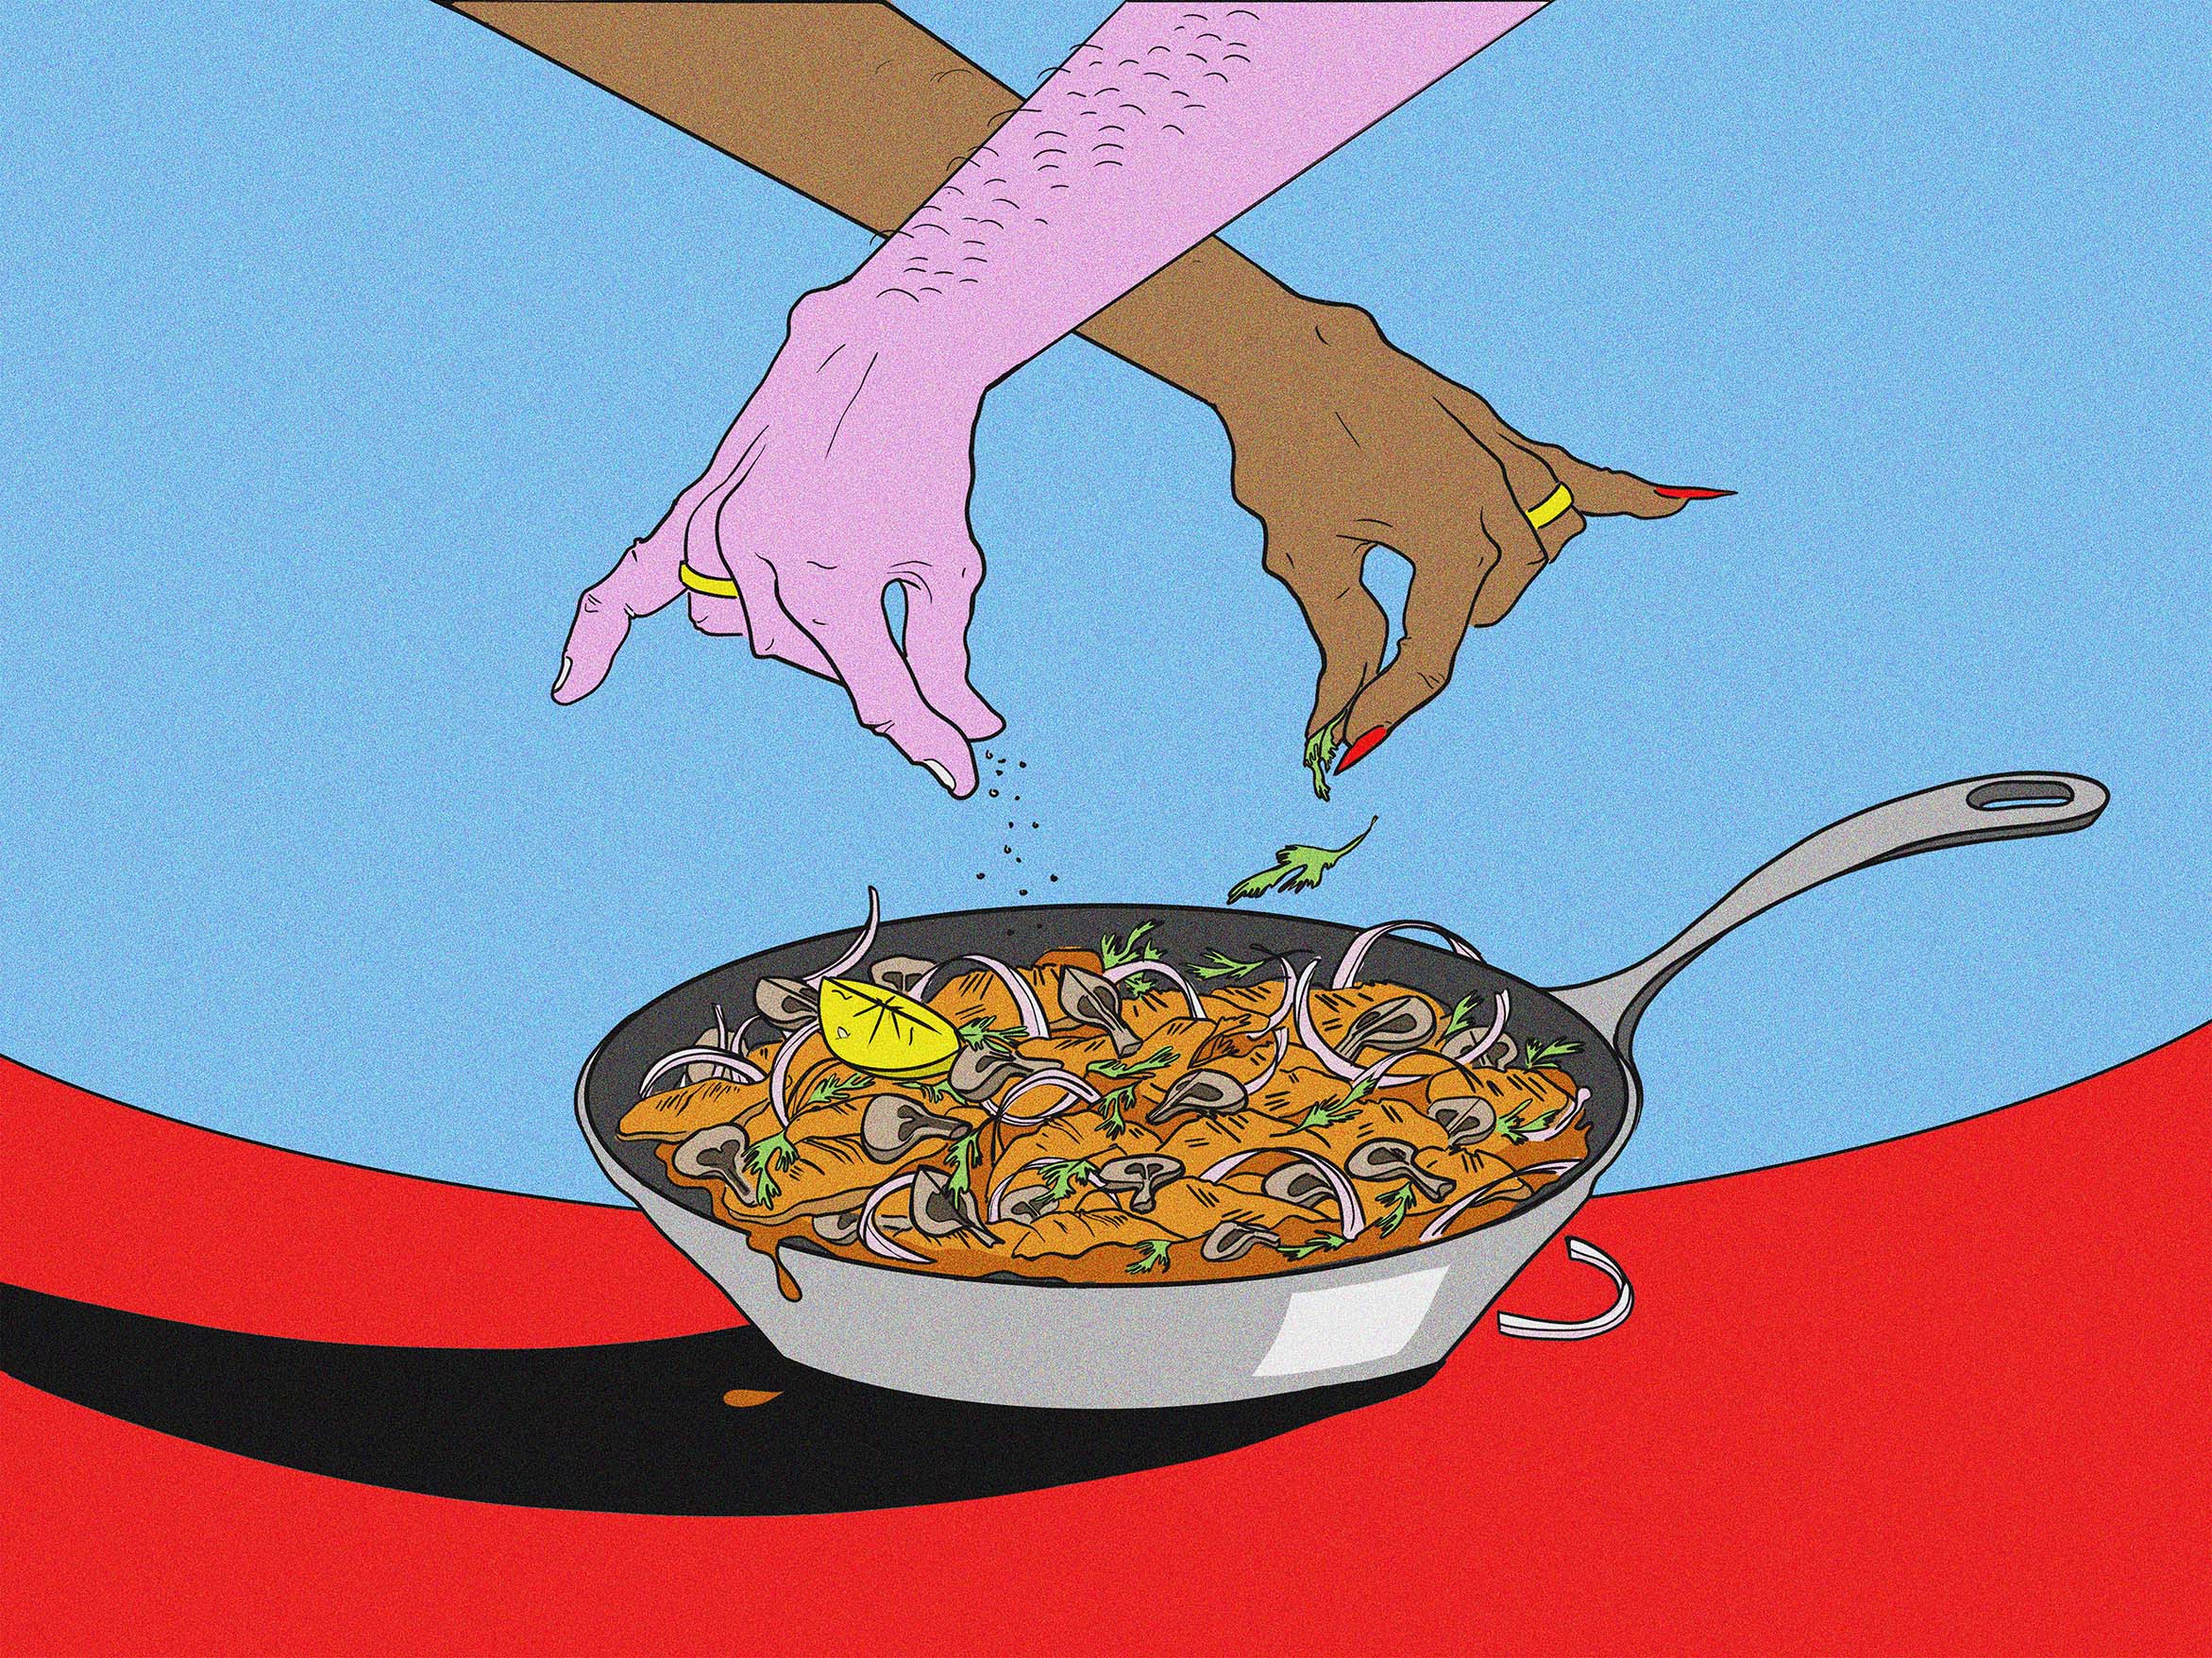 BA Illustration Art work by Catherine Perkins showing a speculative illustration for an article that narrates the importance of cooking together in a relationship. Two people's hands cross over each other, sprinkling seasoning into a frying pan of food